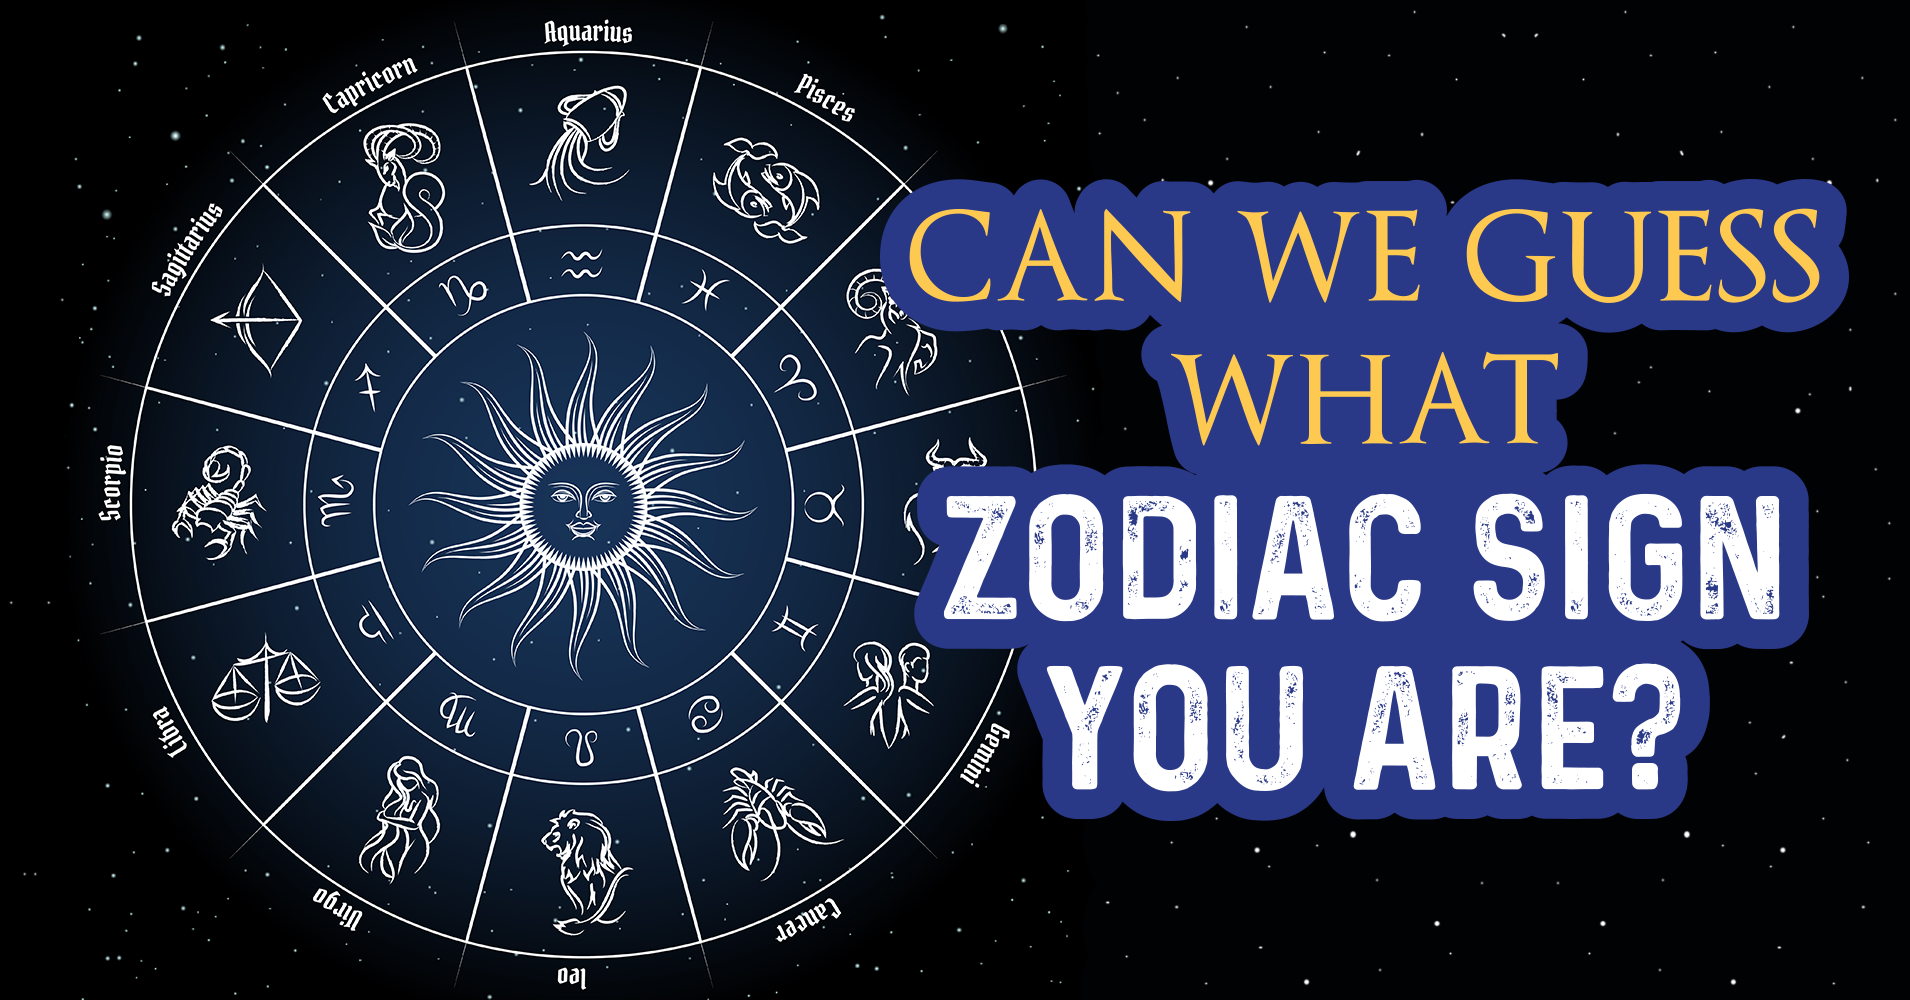 Can We Guess What Zodiac Sign You Are? - Quiz - Quizony.com